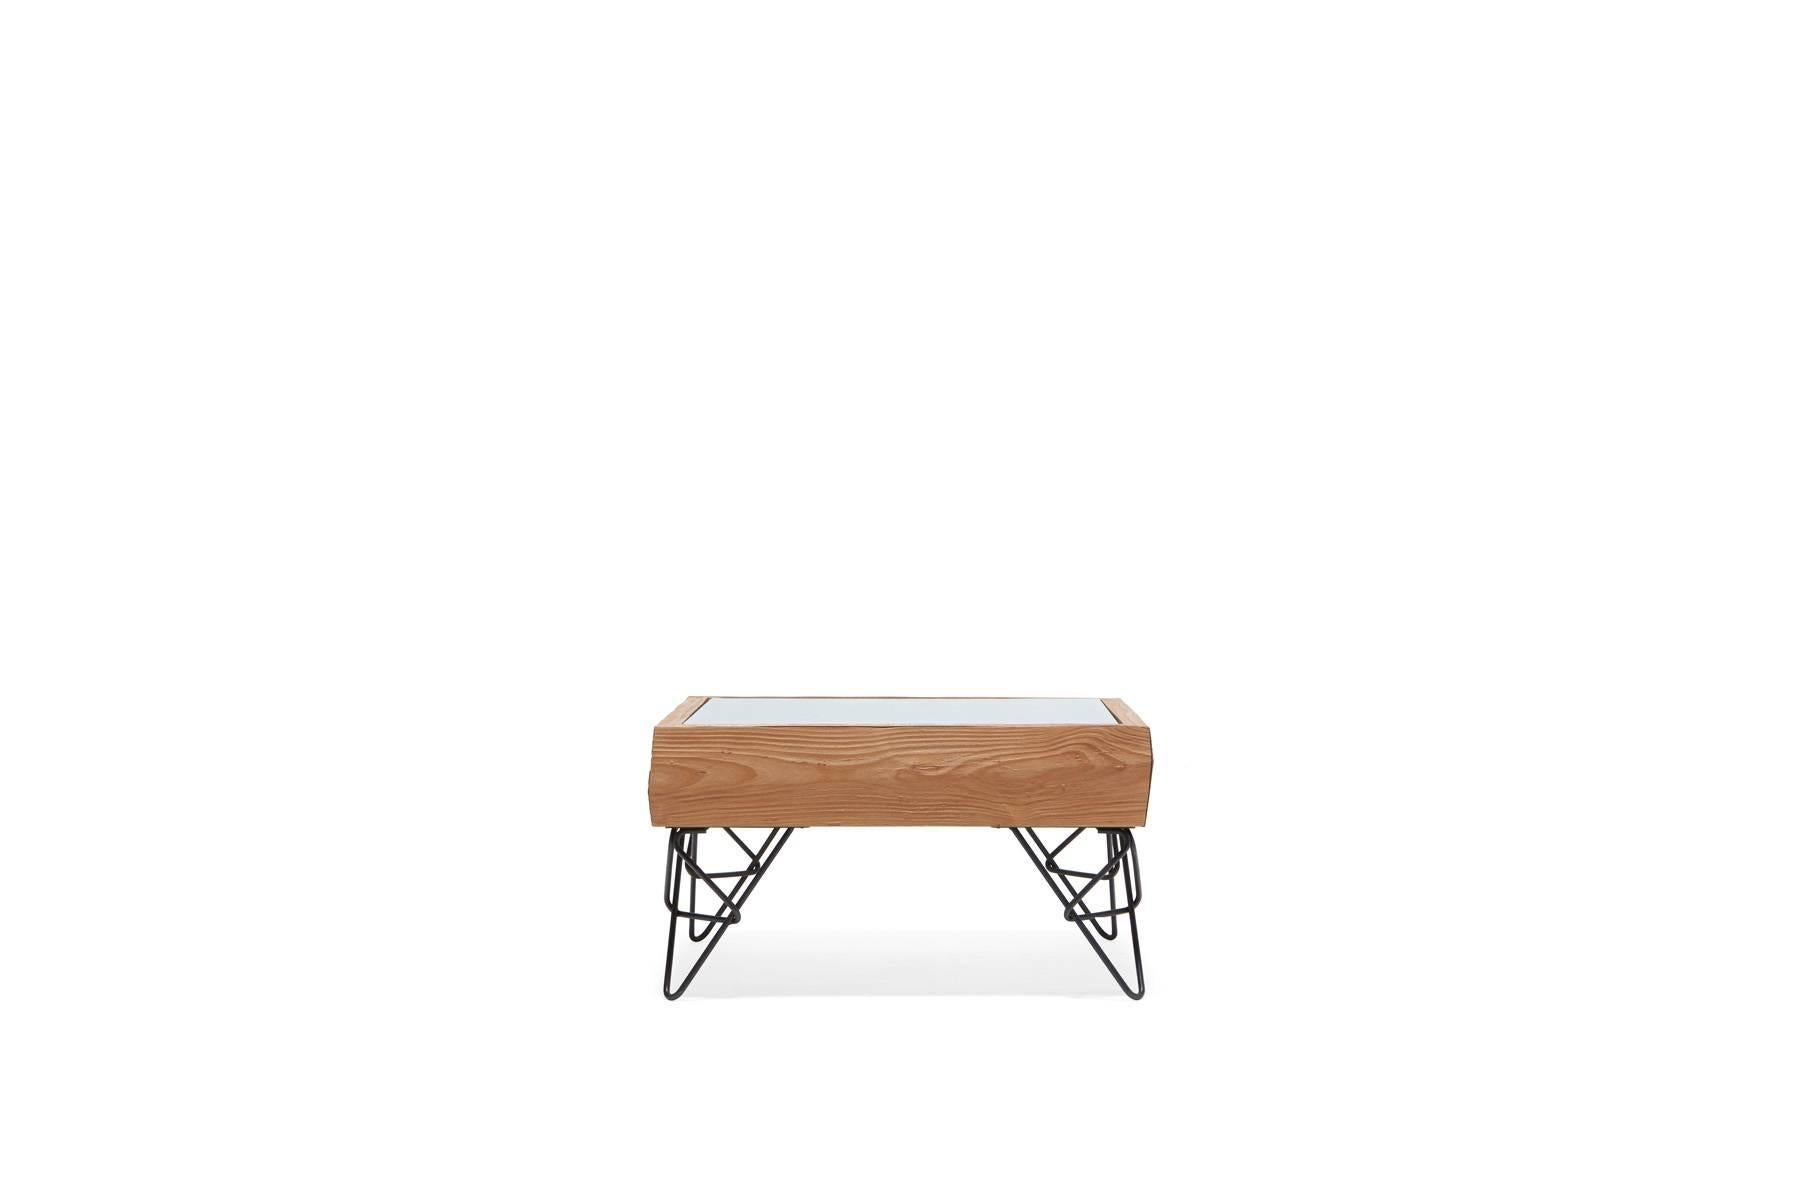 Sandblasted alder wood to simulate the effect that water and sand have on driftwood, paired with black hairpin legs in a unique design. The table has a hidden drawer to allow out-of-sight storage as well as access to the wood tray beneath the glass